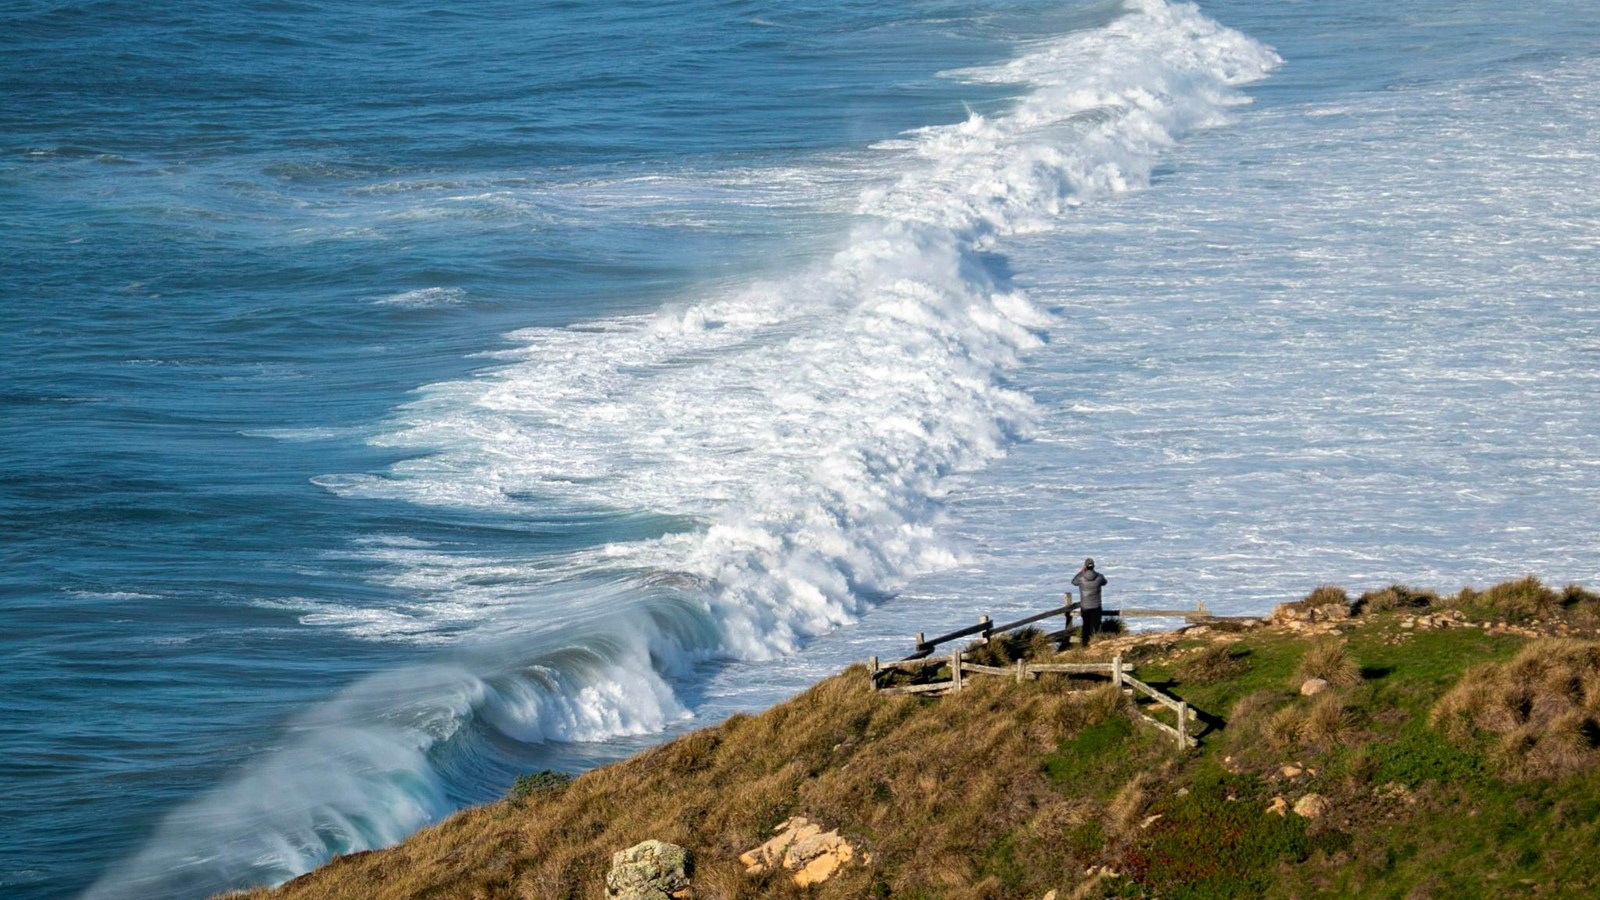 A visitor watches the crashing waves below from a high and fenced-in overlook. 